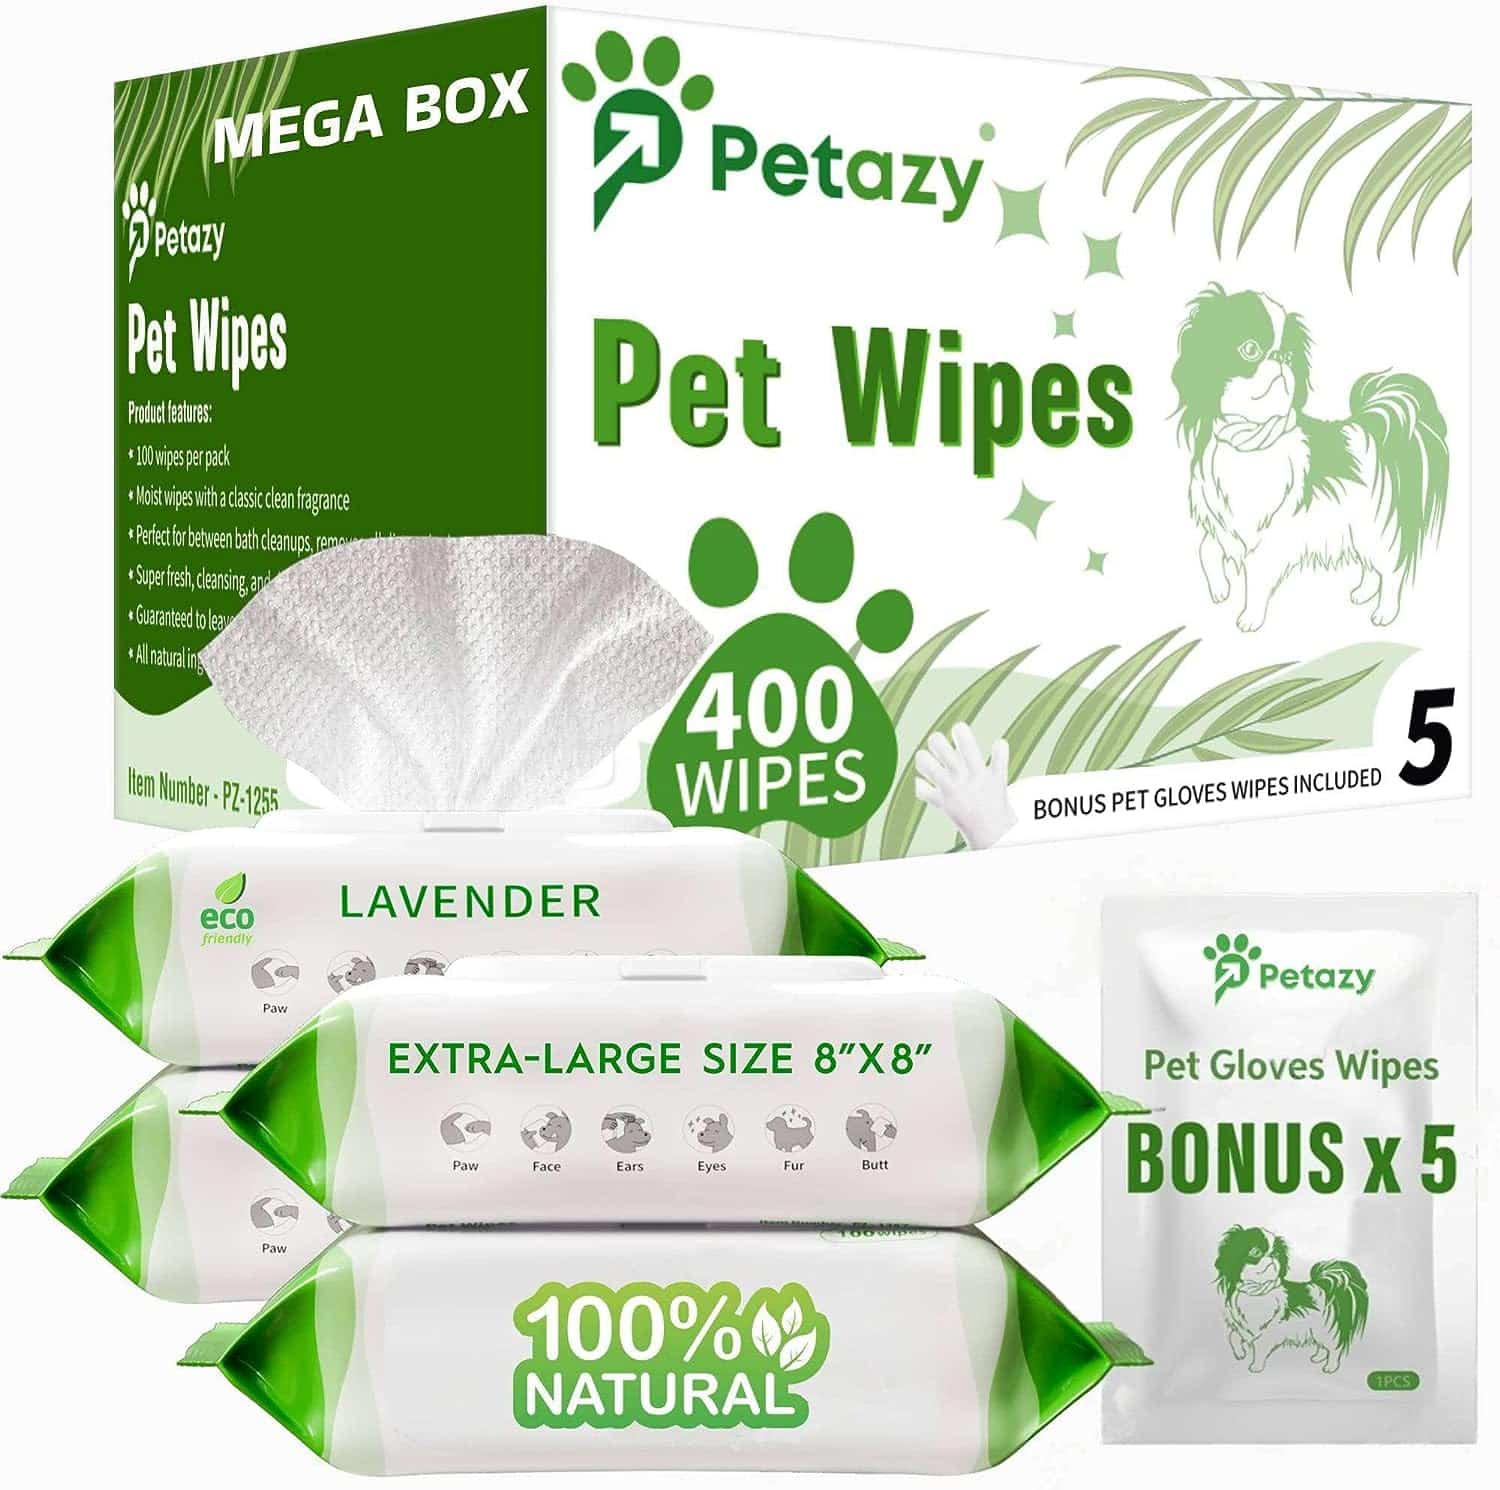 Petazy 400 Dog Wipes for Paws and Butt Ears Eyes Review